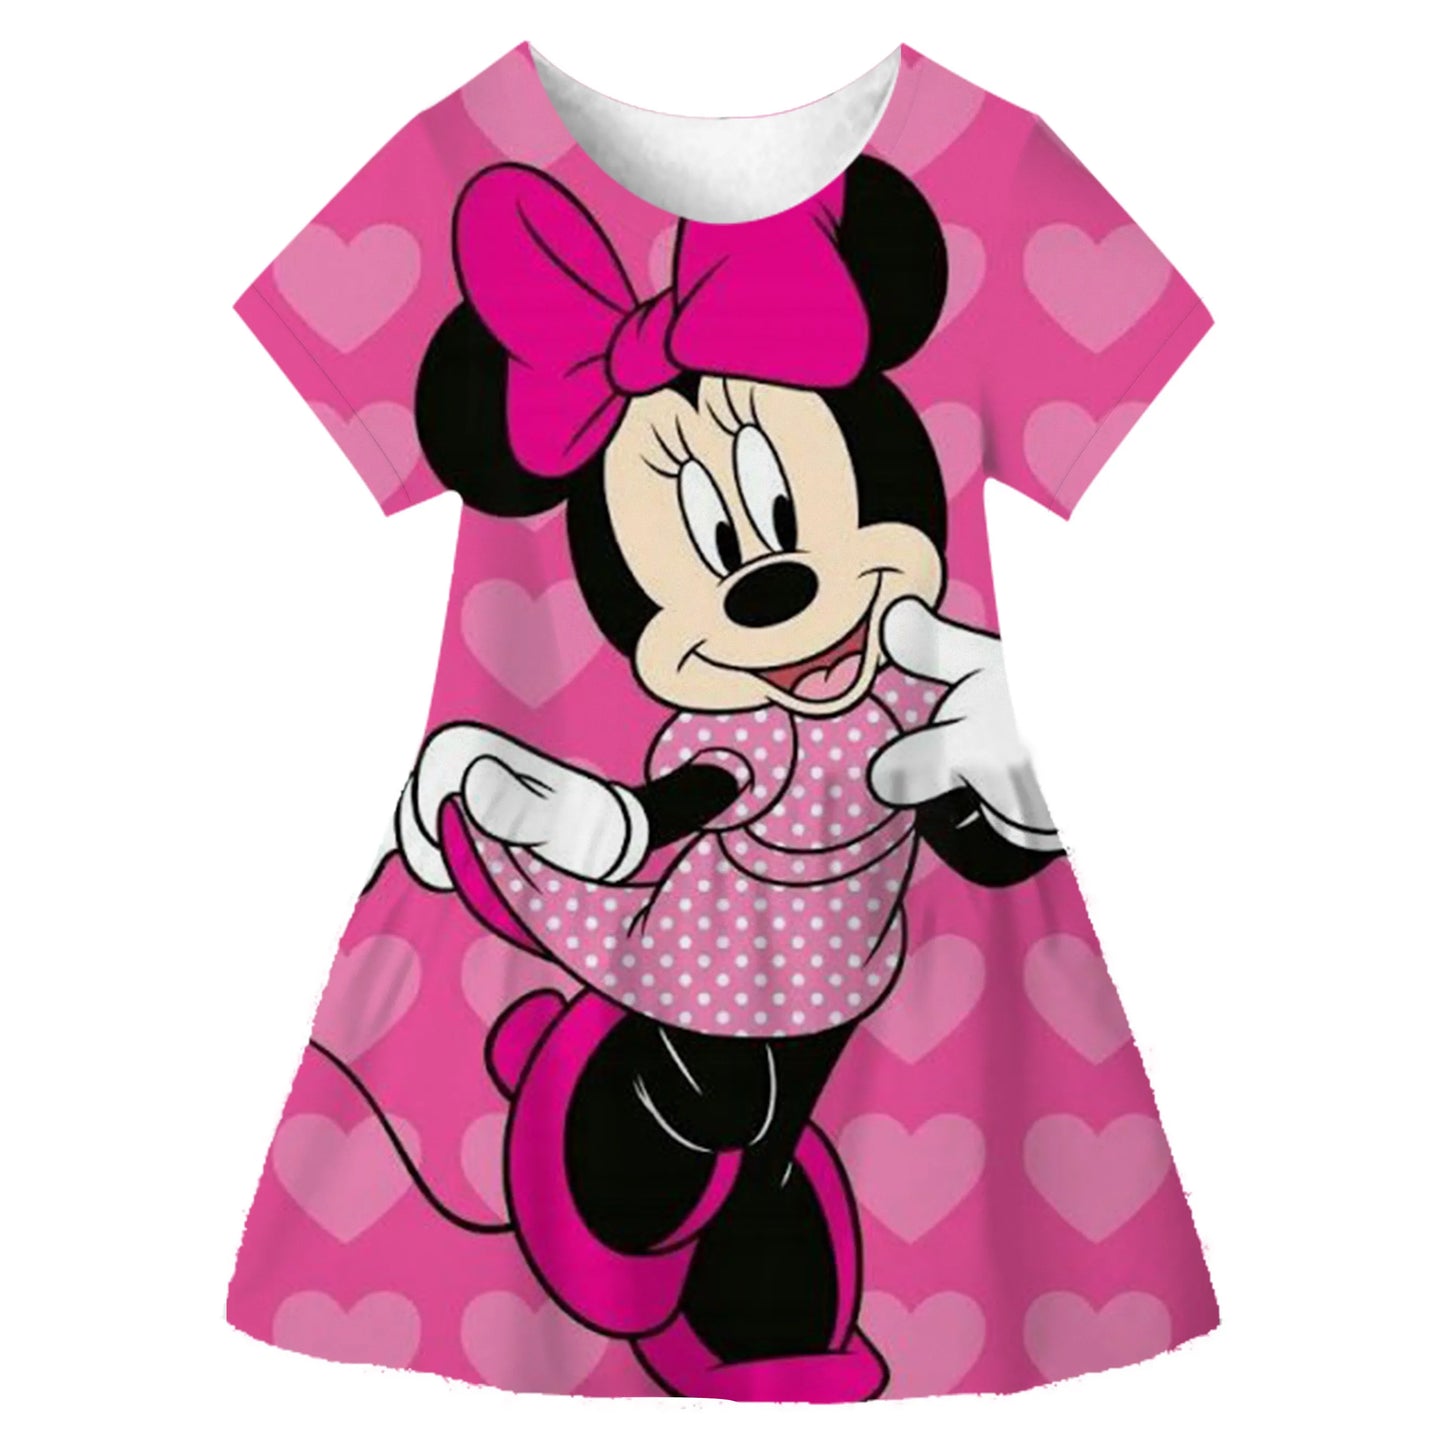 Disney Minnie Mouse Baby Girl Dress - Cosplay Princess Costume for Girls Kids Birthday Christmas Party